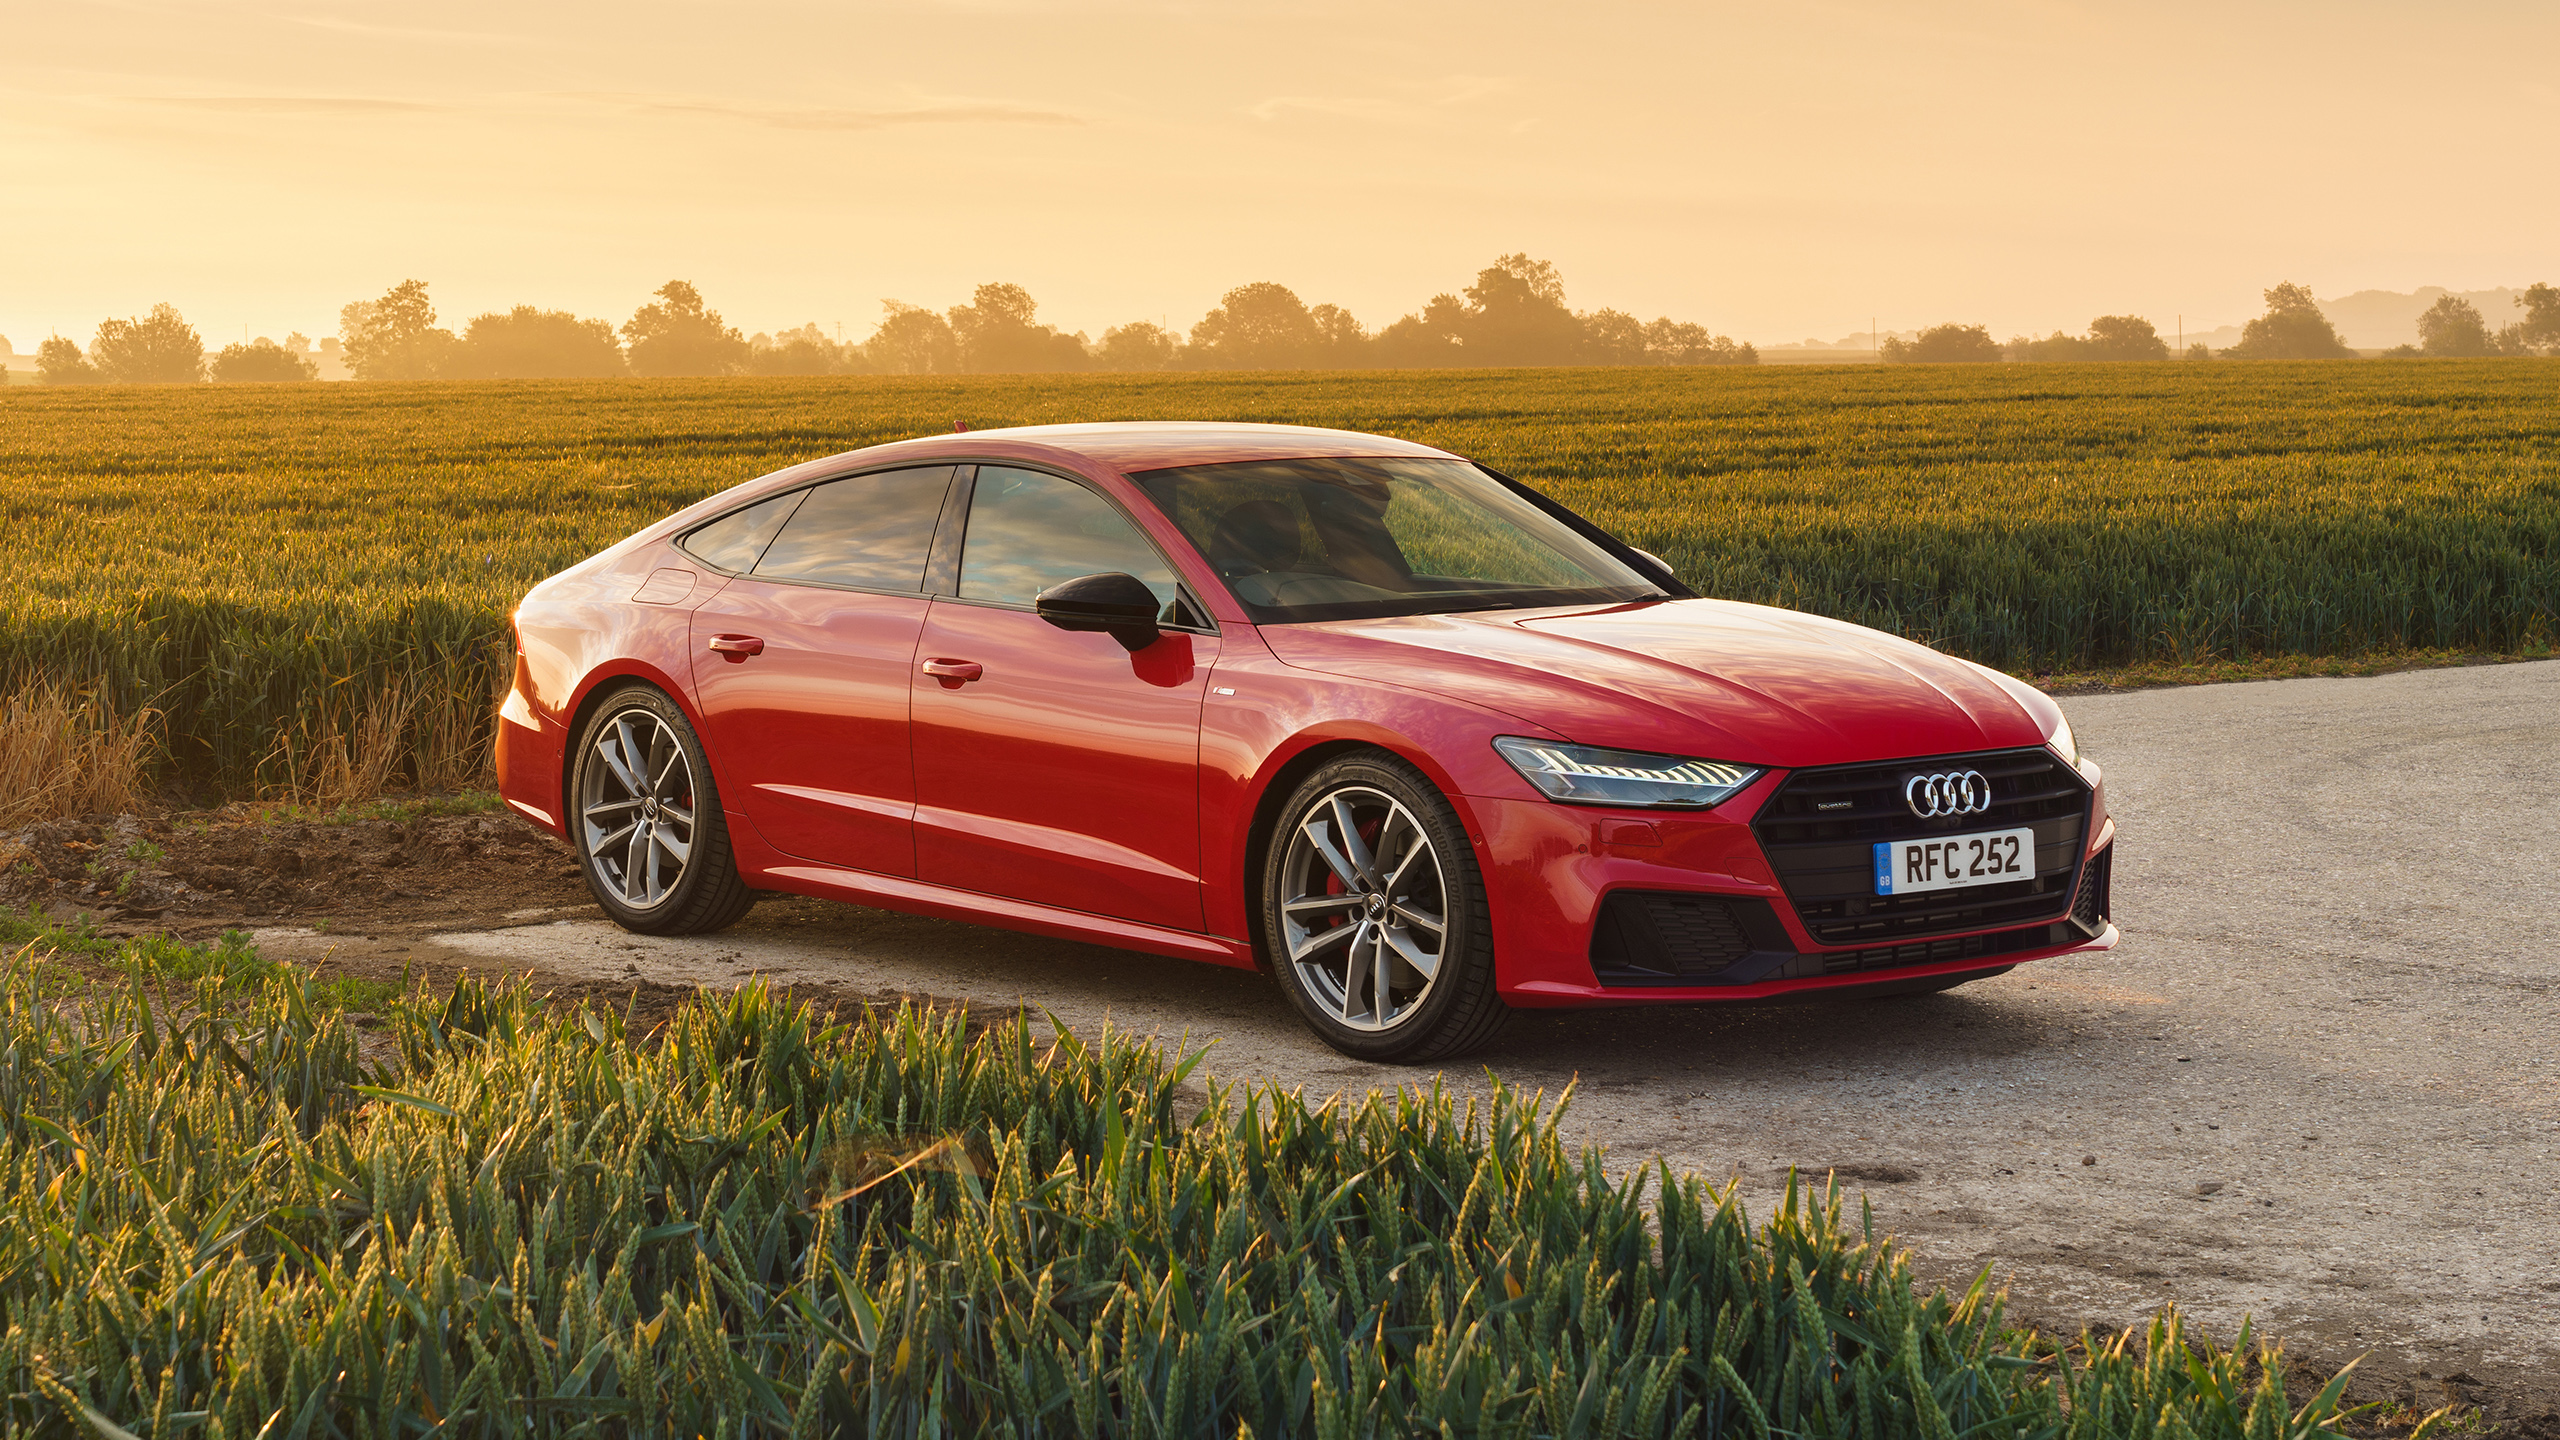 Audi A7 Wallpapers